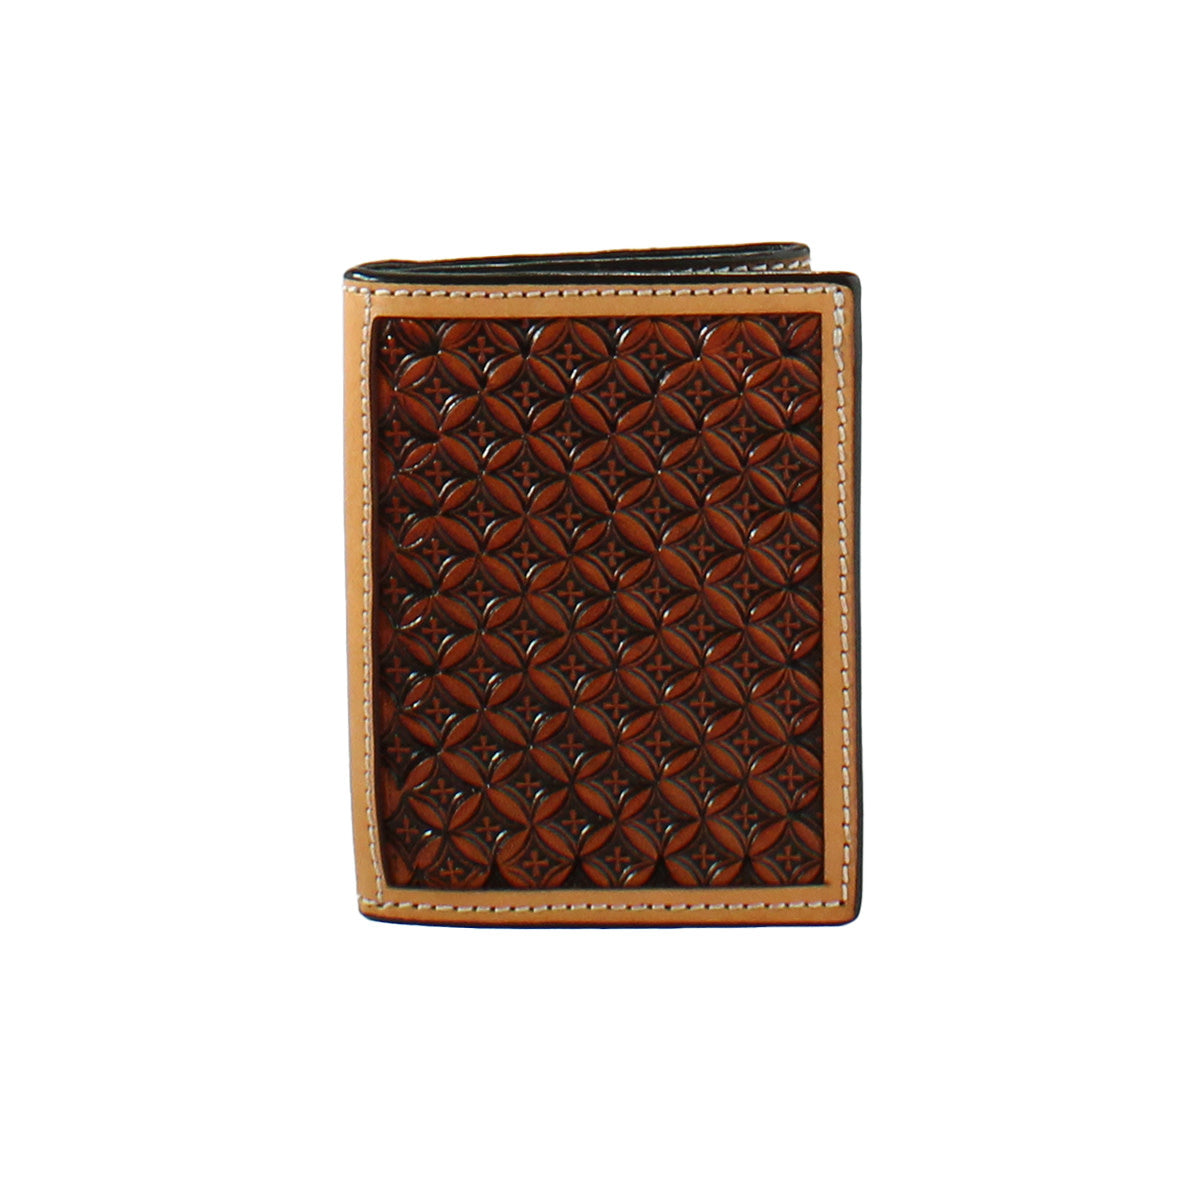 3D Cross Stamped Western Trifold Wallet